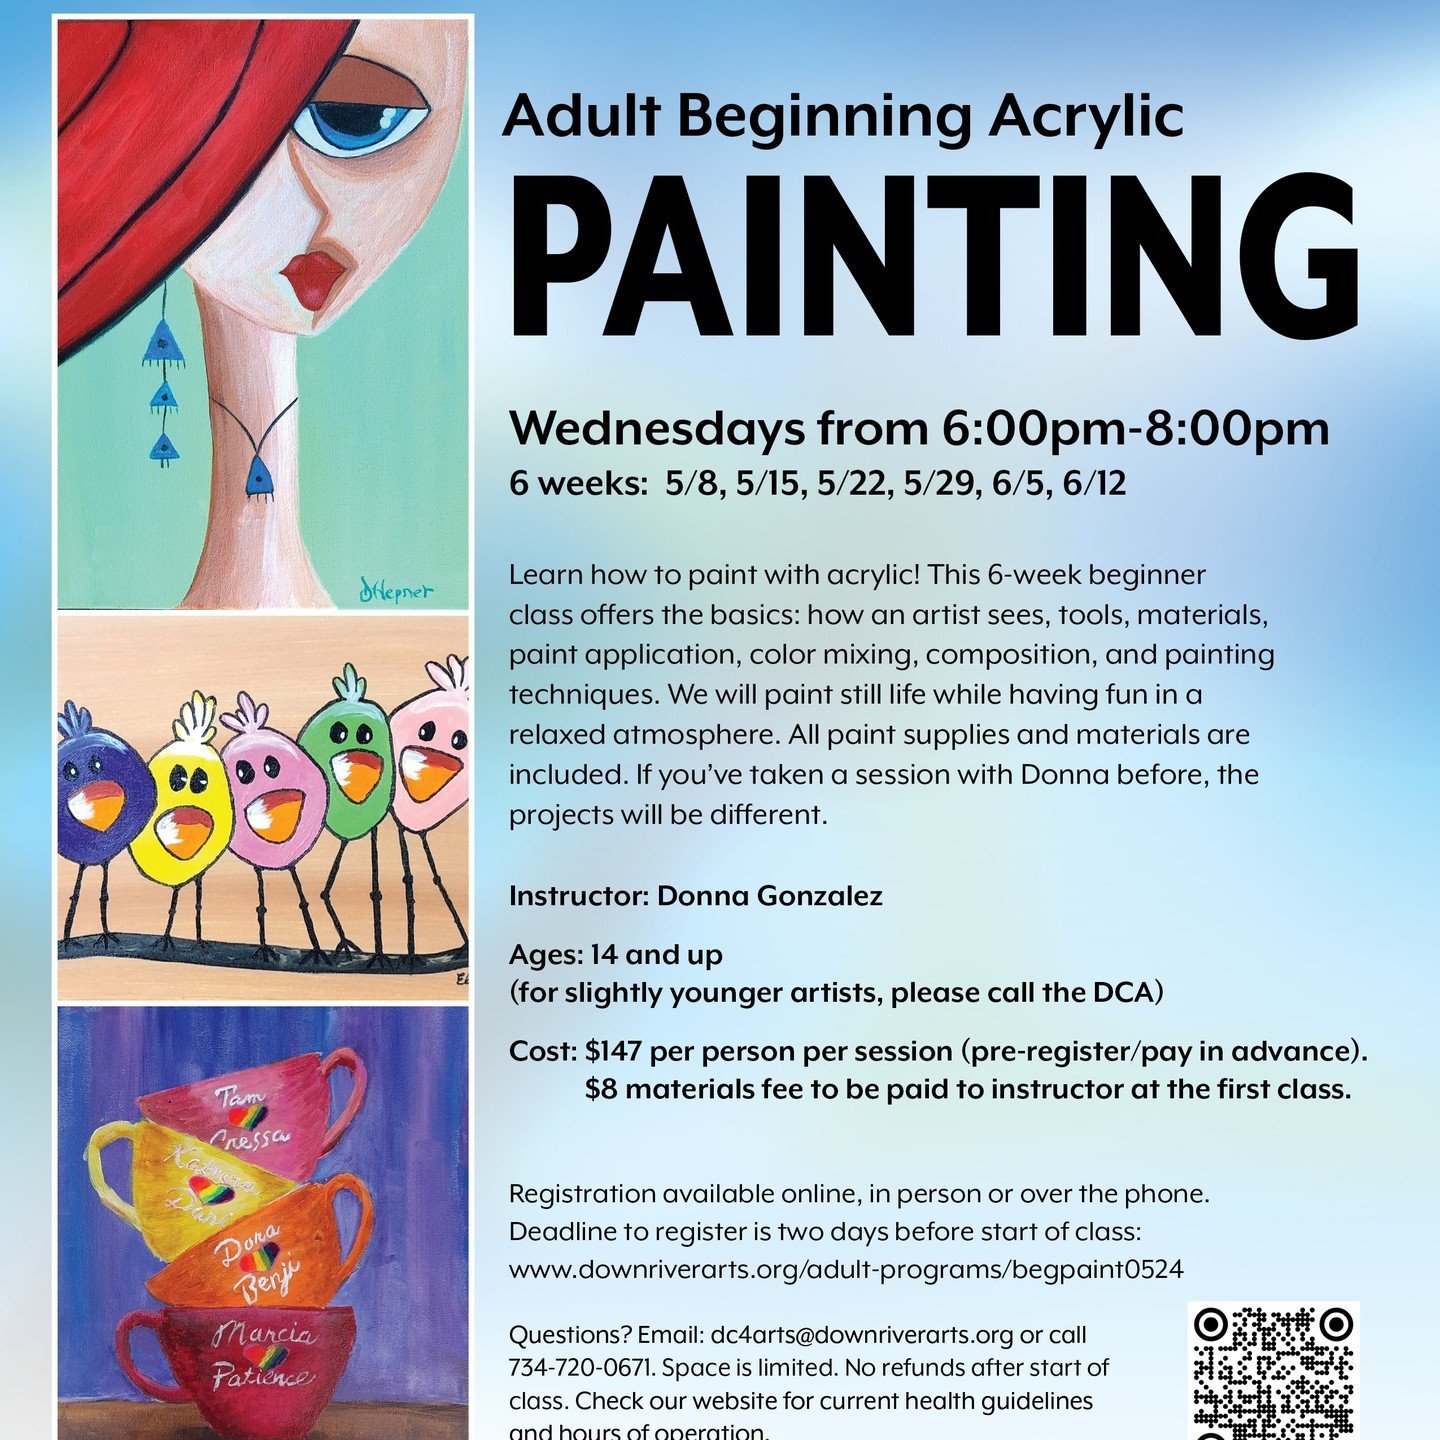 Learn how to paint with acrylic! This 4-week beginner class offers the basics: how an artist sees, tools, materials, paint application, color mixing, composition, and painting techniques. Beginner Level on Wednesdays from 6:00-8:00pm. Hurry and regis